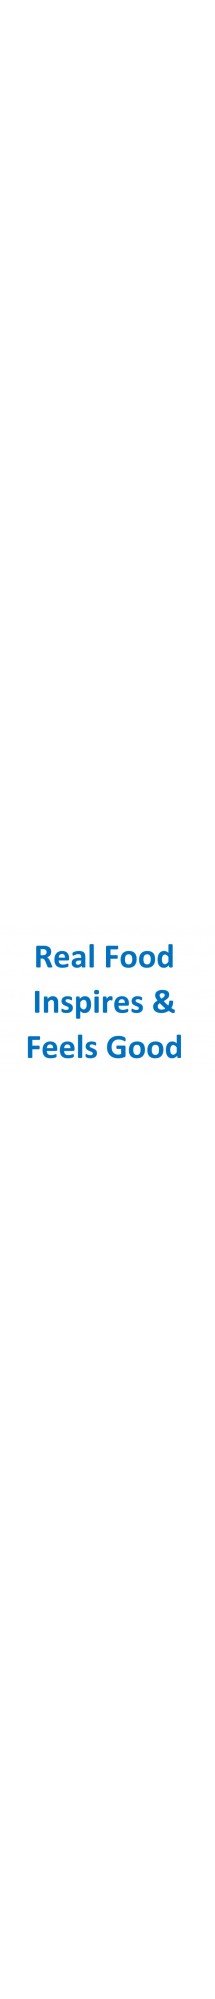 Real food inspires